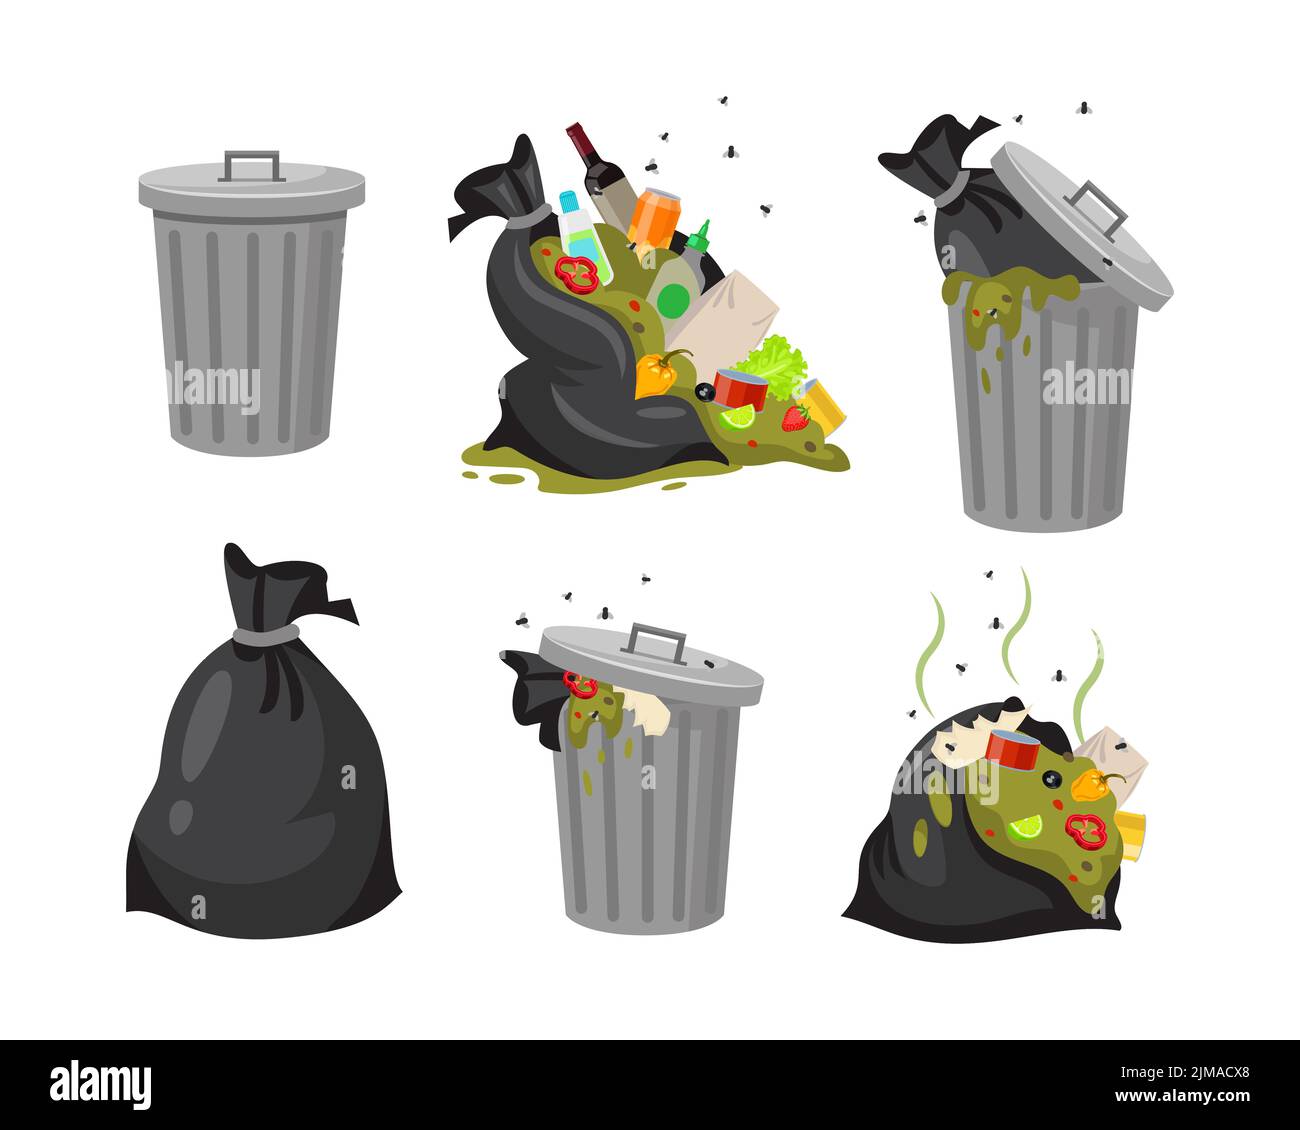 https://c8.alamy.com/comp/2JMACX8/trash-bags-and-dustbin-vector-illustrations-set-collection-of-black-sacks-with-food-waste-open-dirty-garbage-cans-or-dumpsters-with-rubbish-or-junk-2JMACX8.jpg